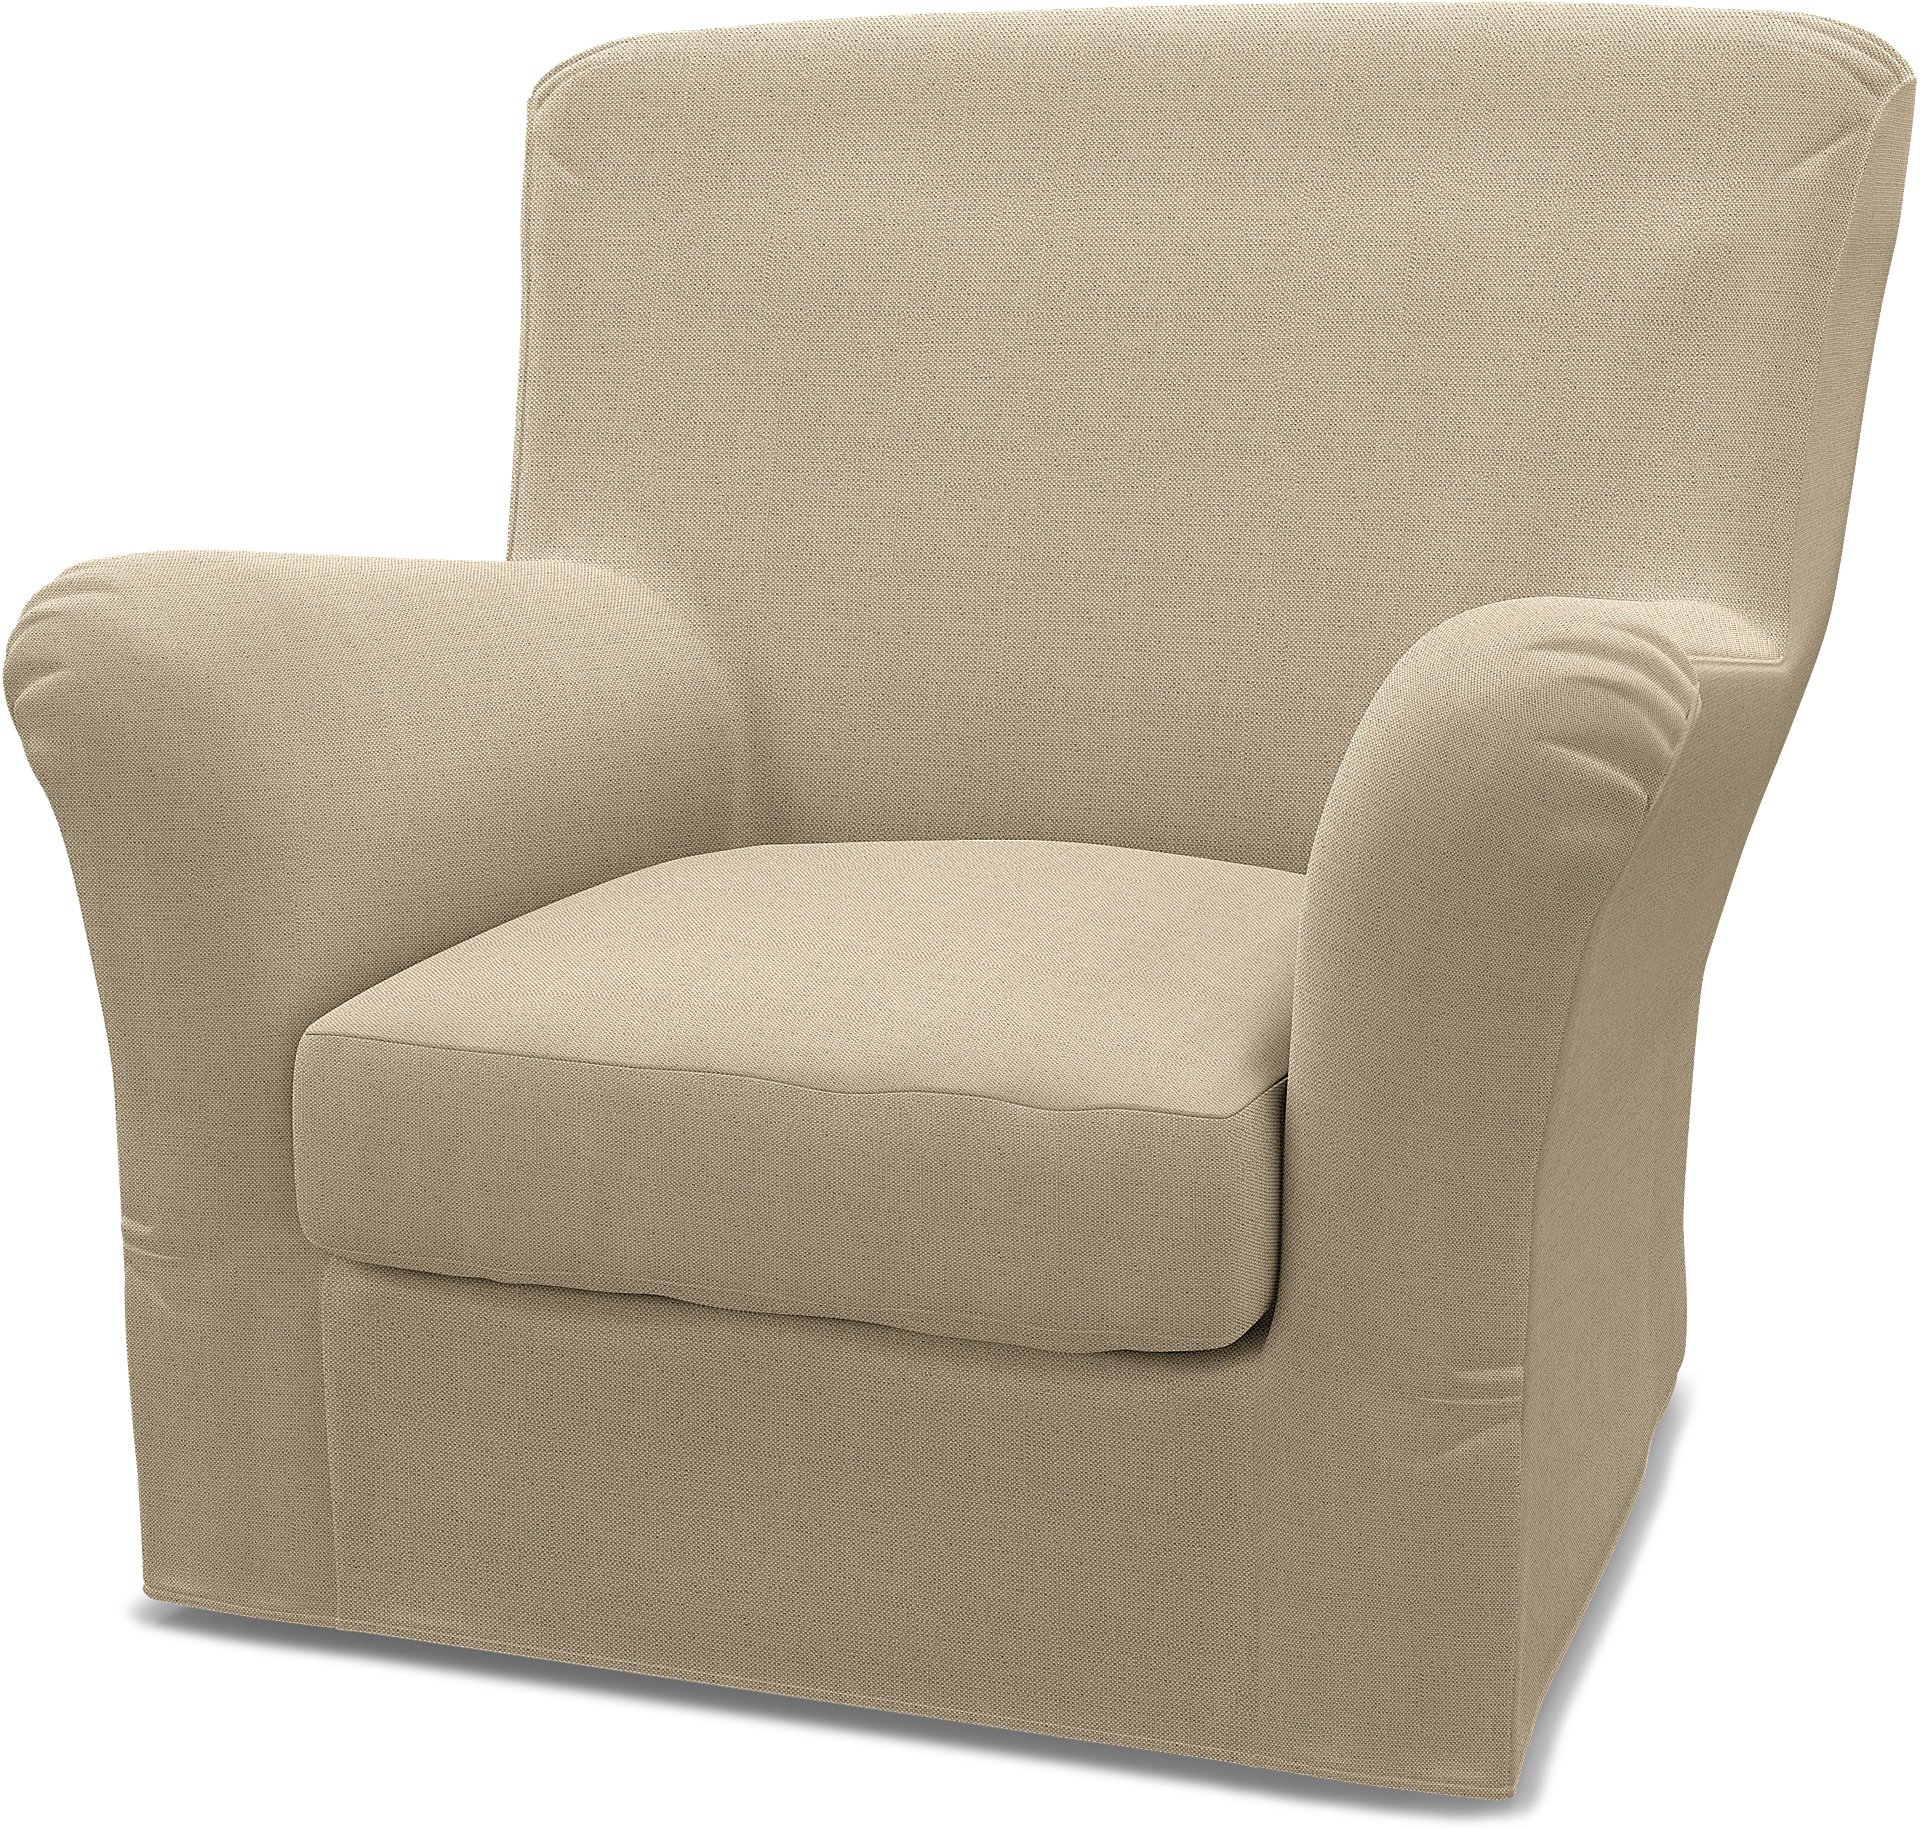 IKEA - Tomelilla High Back Armchair Cover (Small), Unbleached, Linen - Bemz